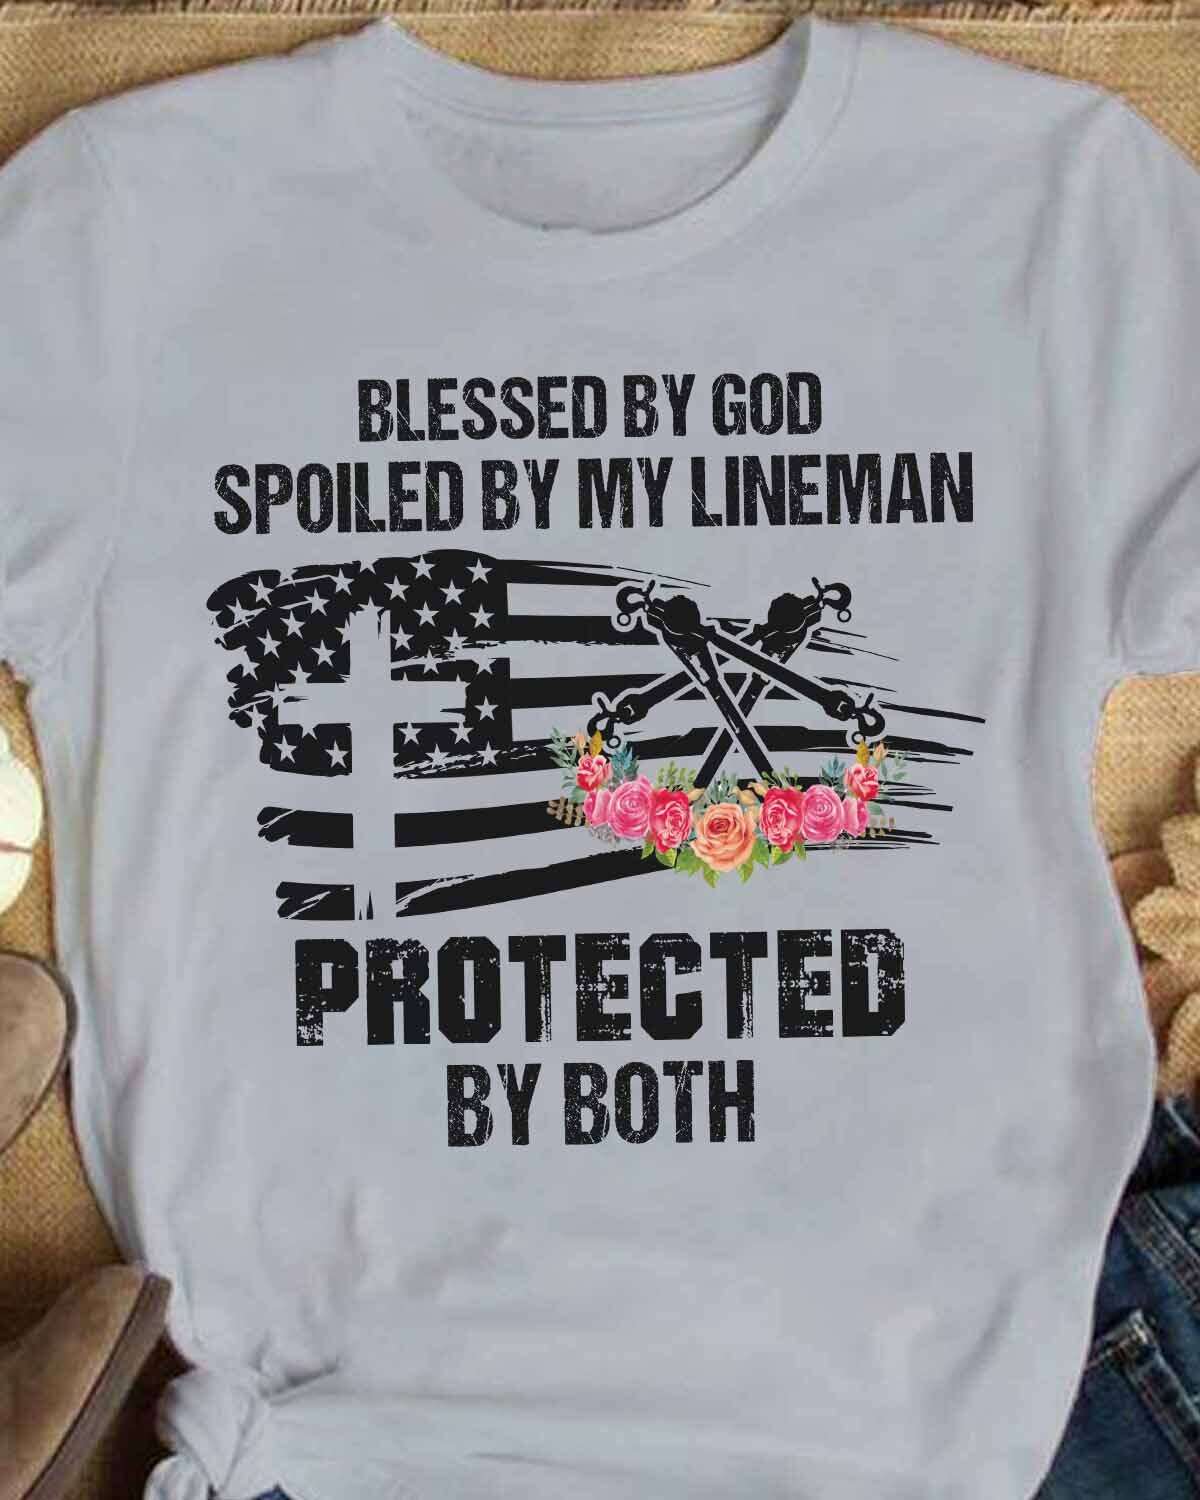 America Lineman, God Lineman - Blessed by god spoiled by my lineman protected by both